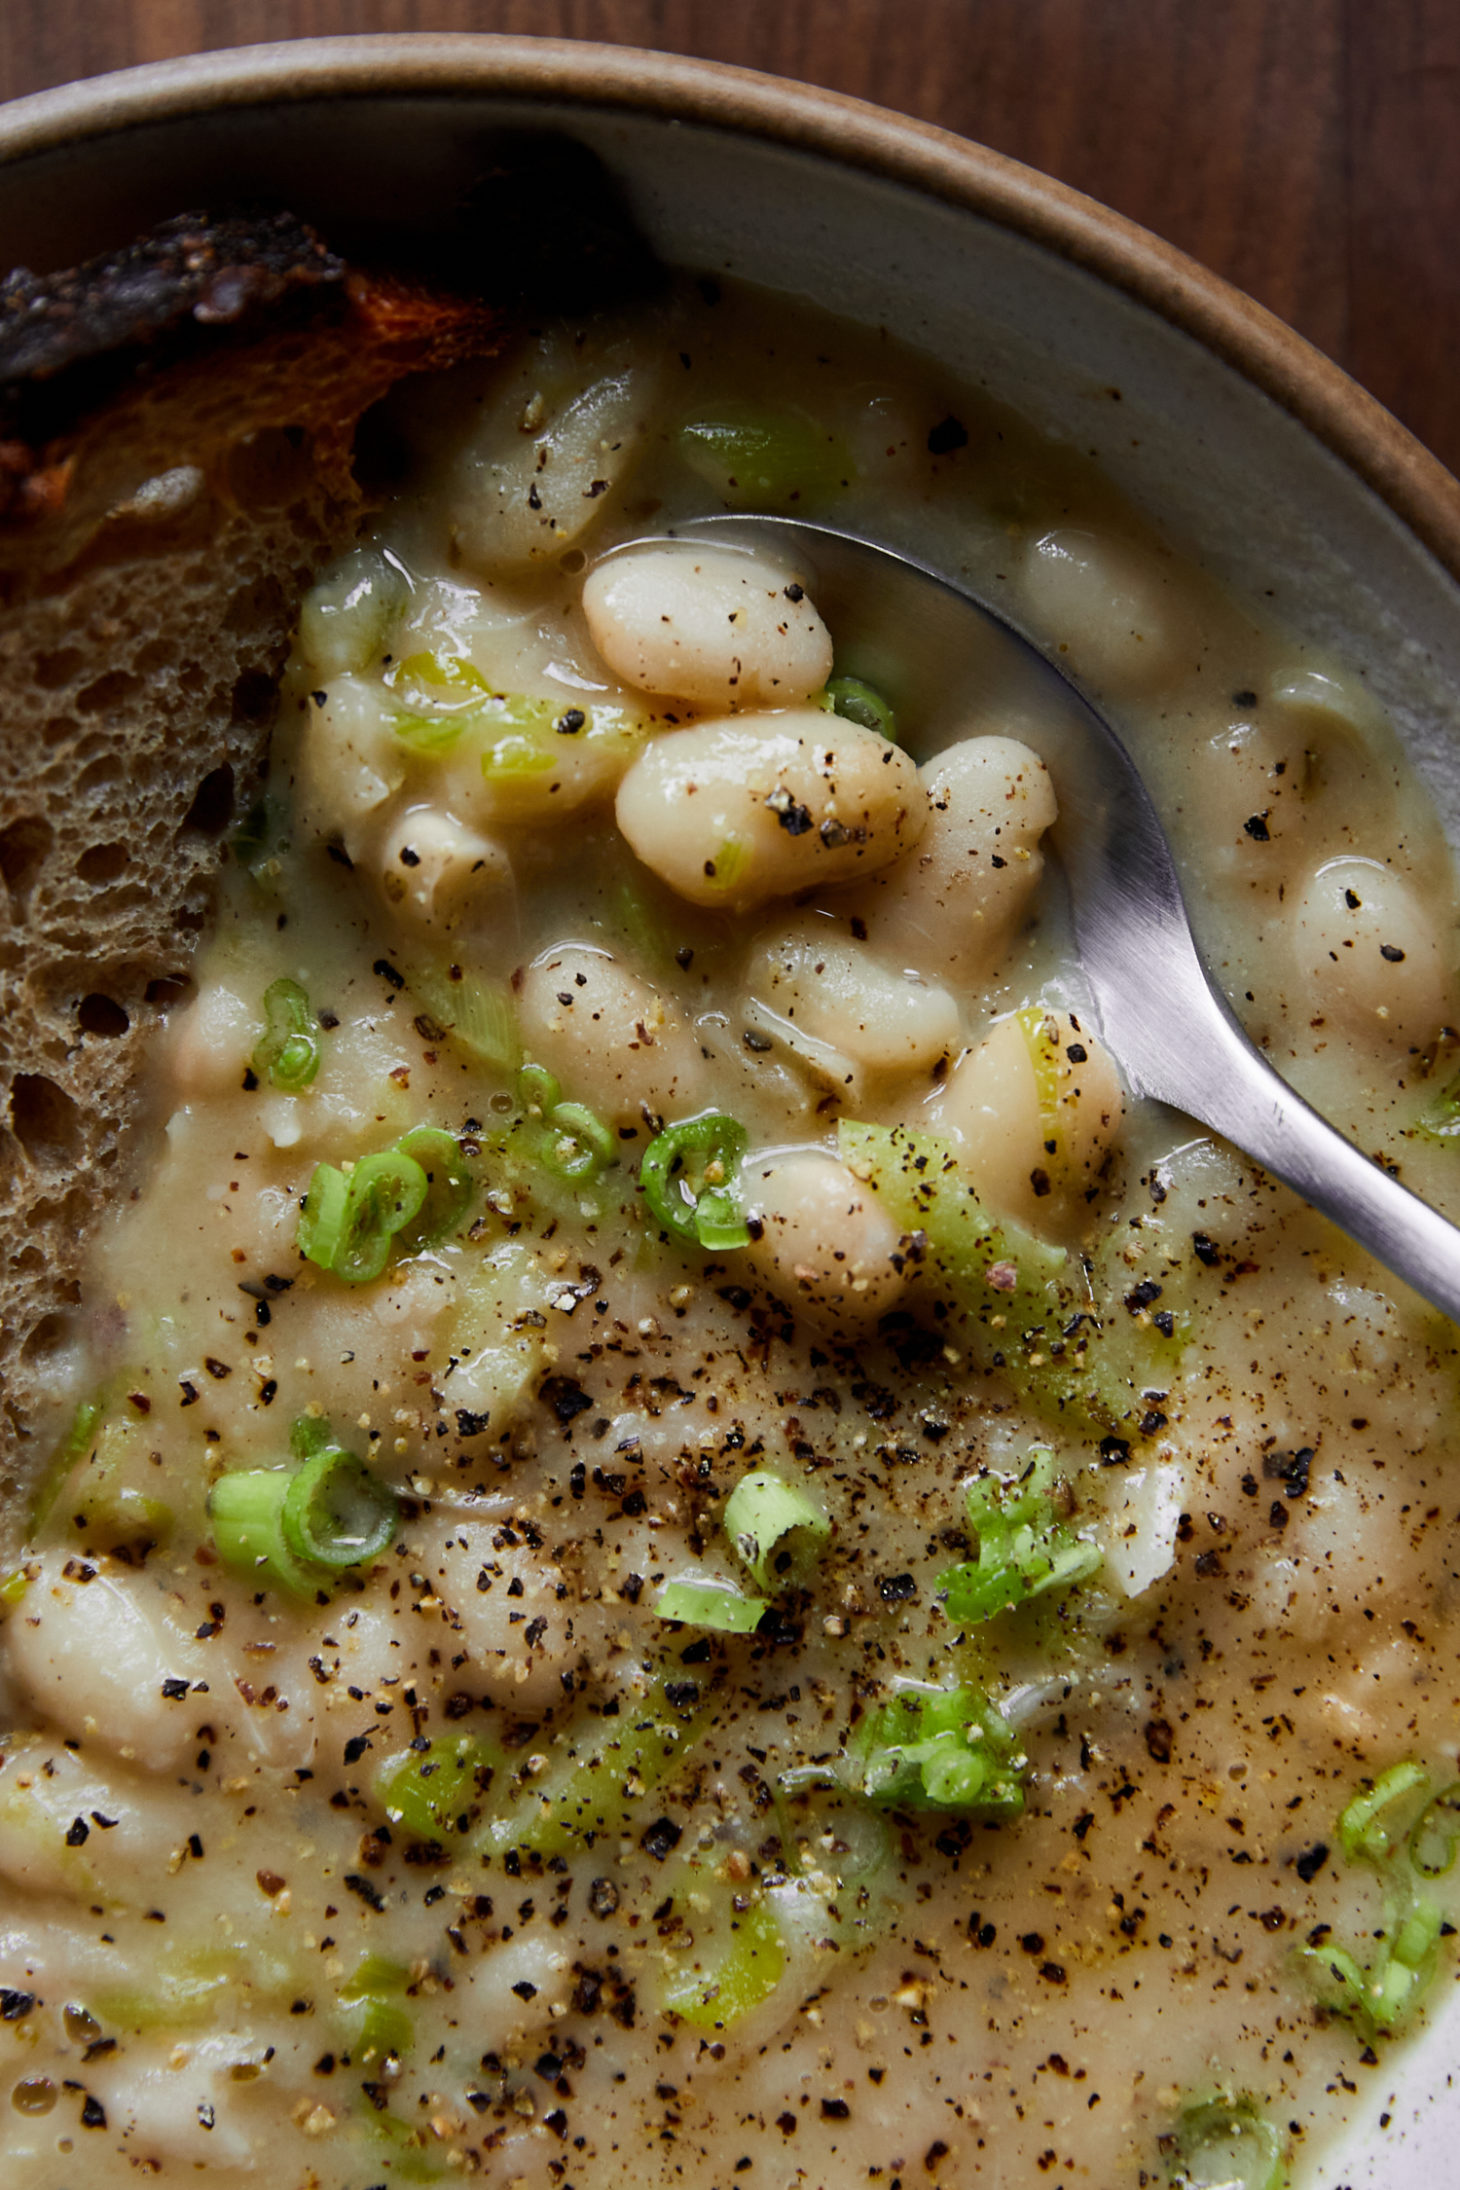 Close-up of white beans in their broth with thinly sliced green scallions and black pepper on top.